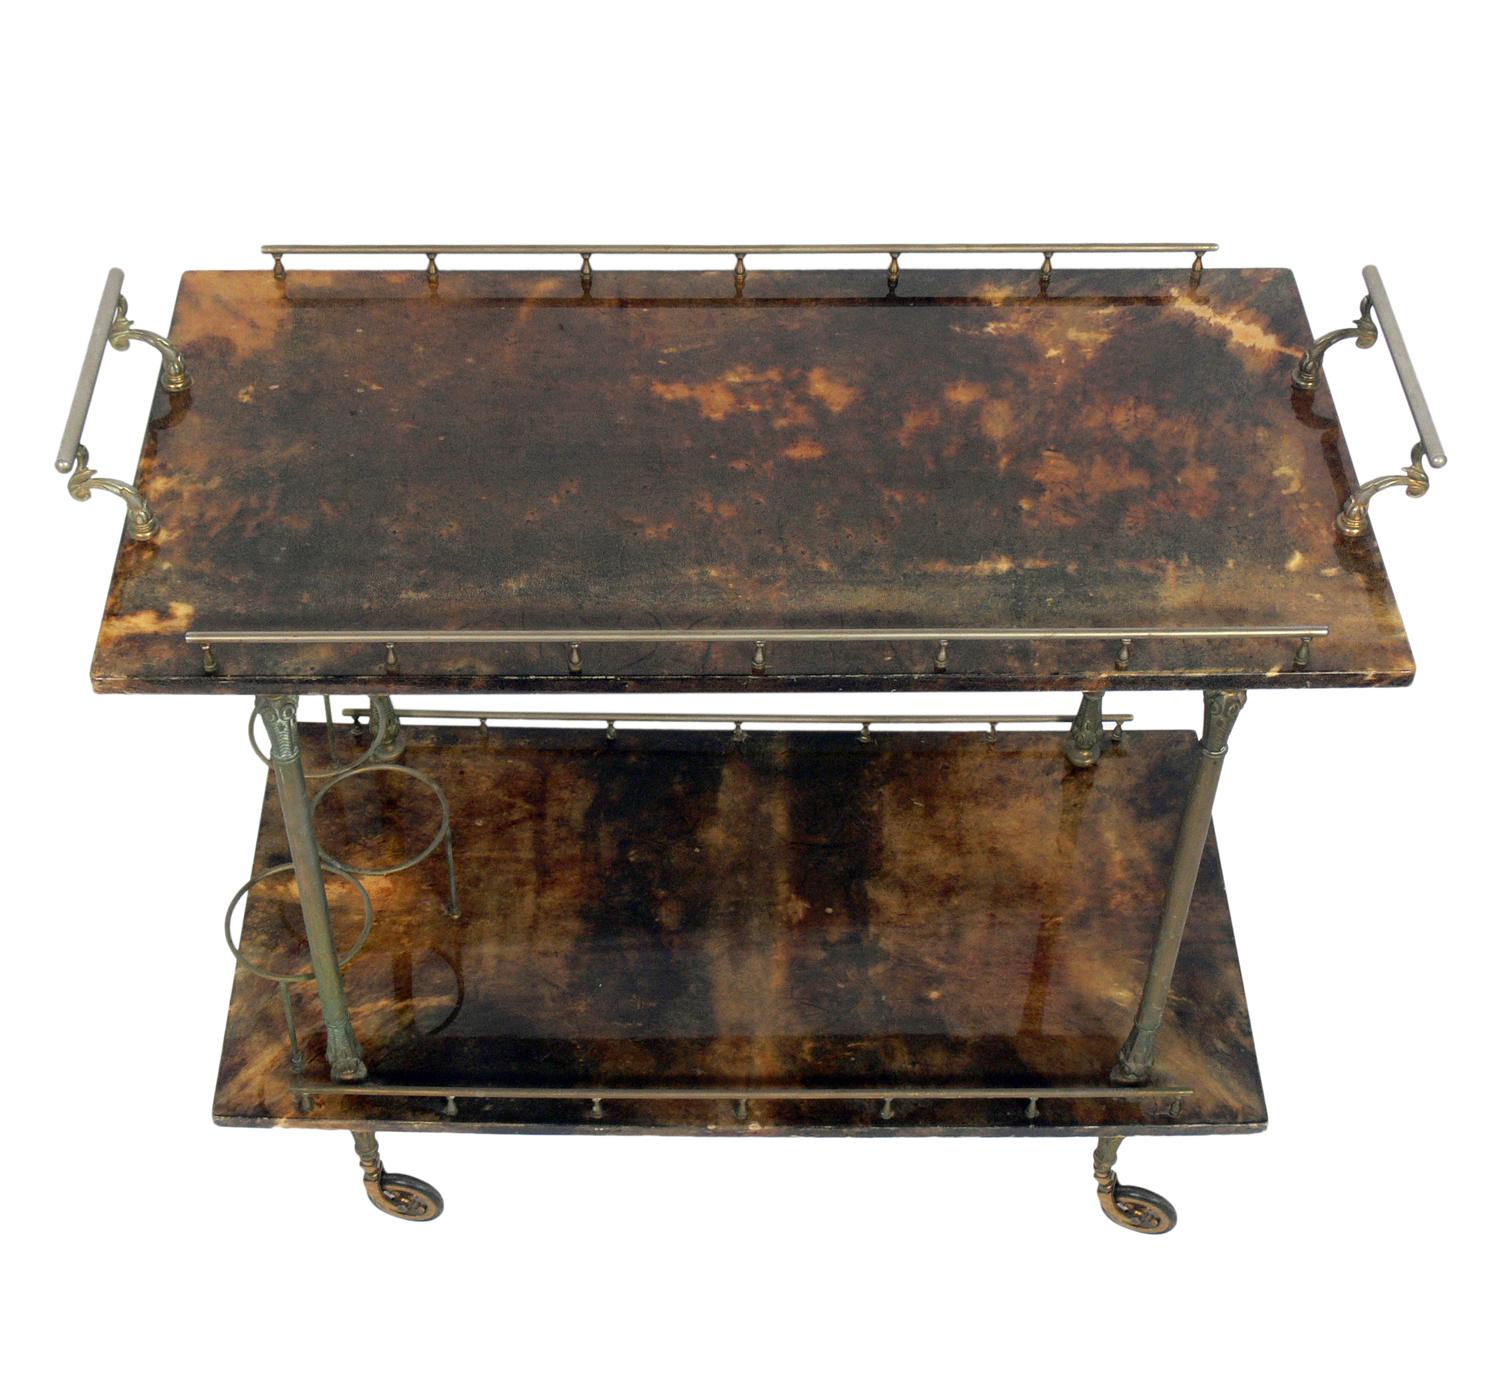 Aldo Tura Goatskin or parchment bar cart, Italy, circa 1960s. Constructed of thickly lacquered goatskin or parchment and gilt metal hardware. Perfect bar or serving cart, or as rolling storage in an office.